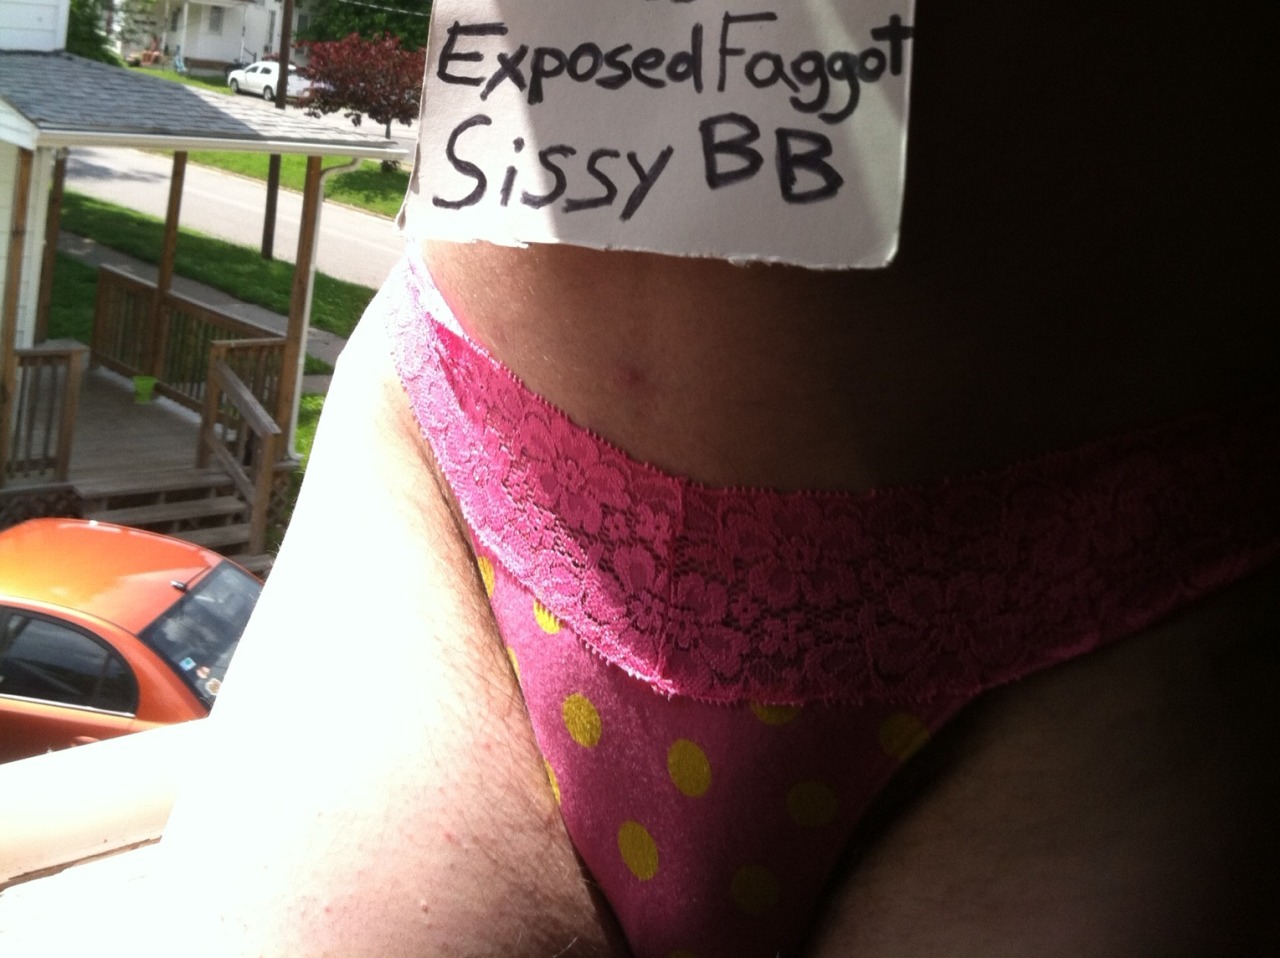 sissy faggot bb needs bbc obviously because she can&rsquo;t resist being exposed